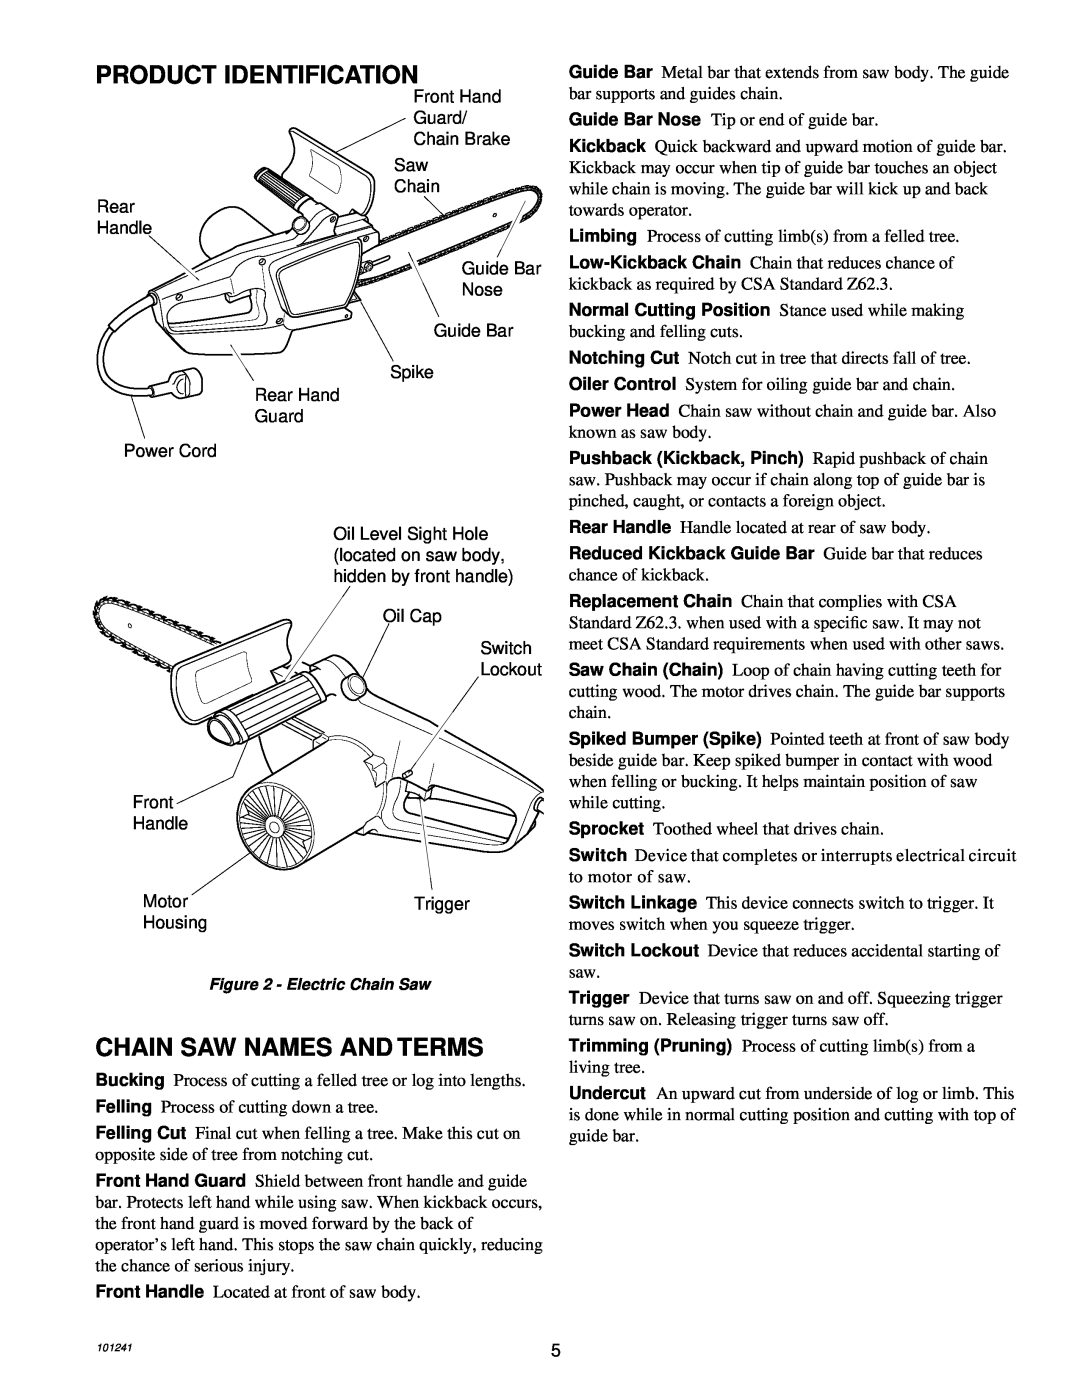 Remington 100582-01, 100582-02, EL-7B owner manual Product Identification, Chain Saw Names And Terms 